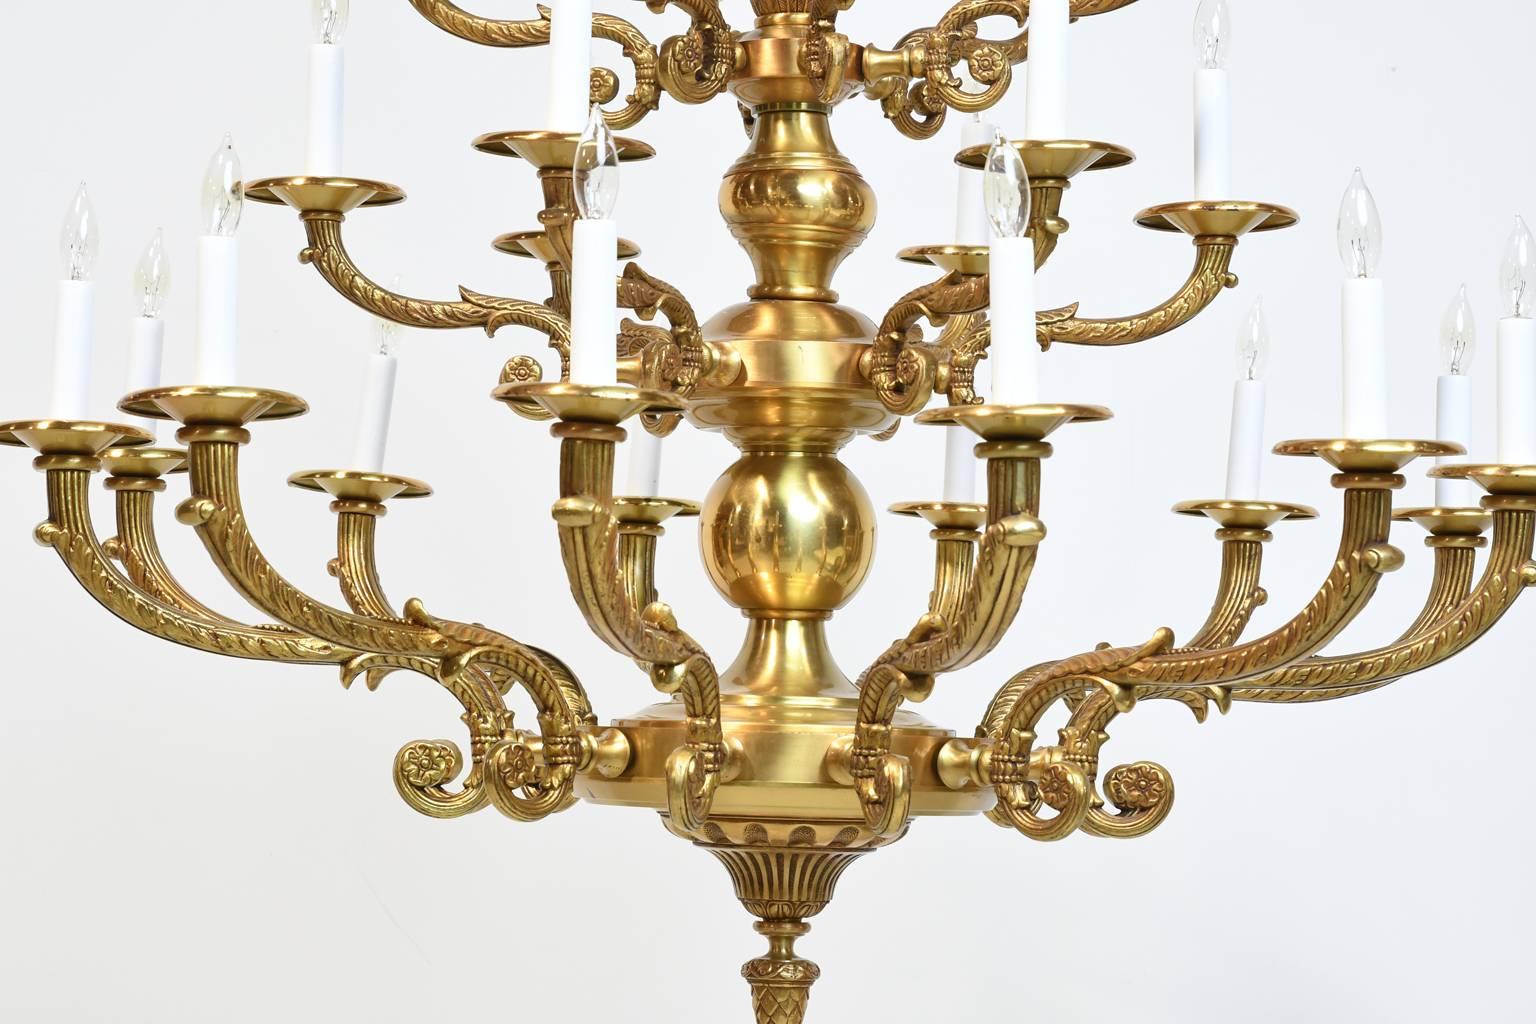 A very large and handsome brass chandelier with three staggered tiers offering 25 lights that can illuminate a total of 1,000 watts, using 15 to 40 watt bulbs per light. Re-wired with a heavy gauge wire to allow for 1,000 watts. All electrical parts